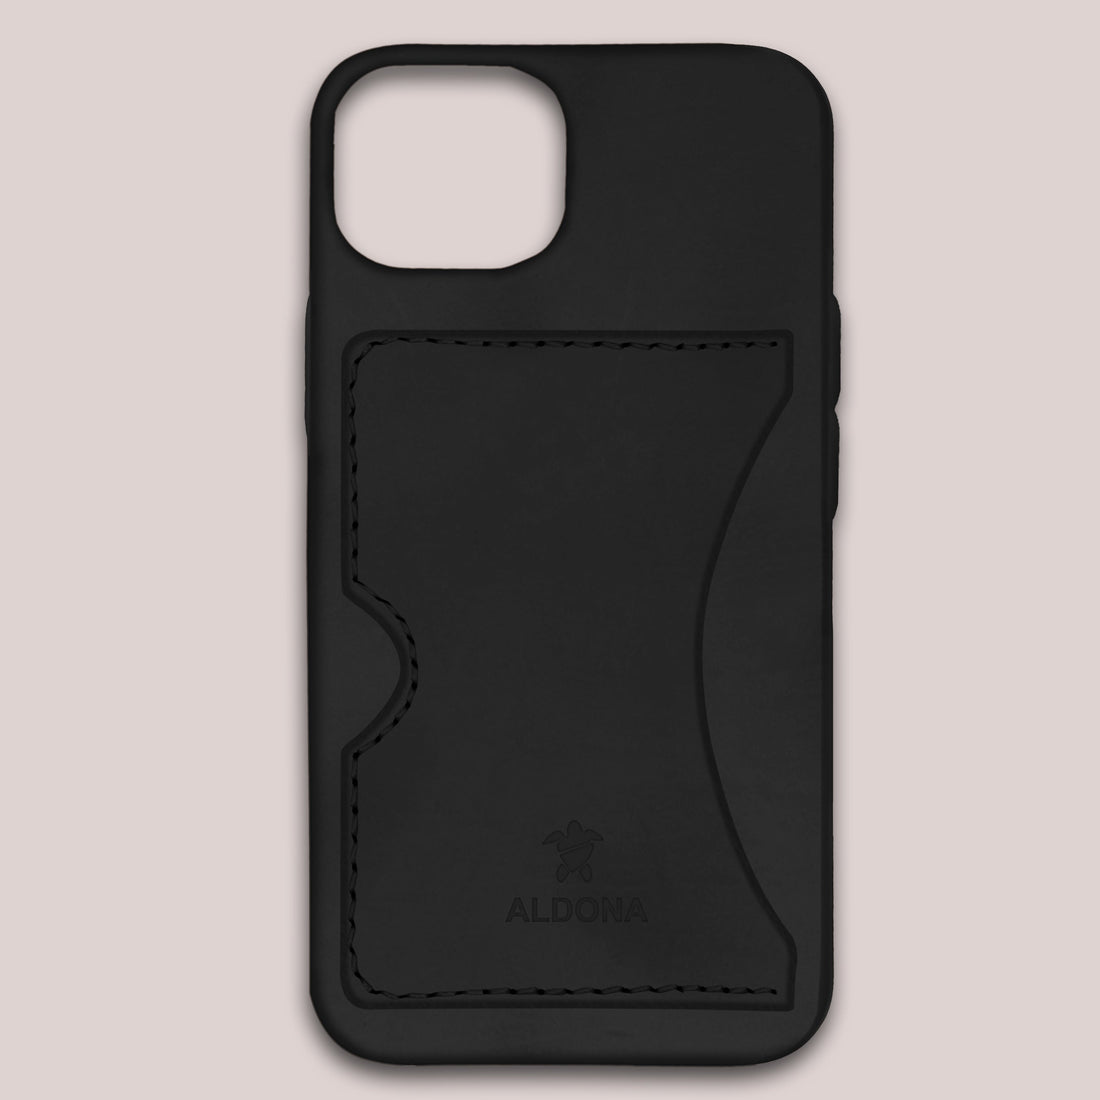 Baxter Card Case for iPhone 13 Pro - Onyx Black